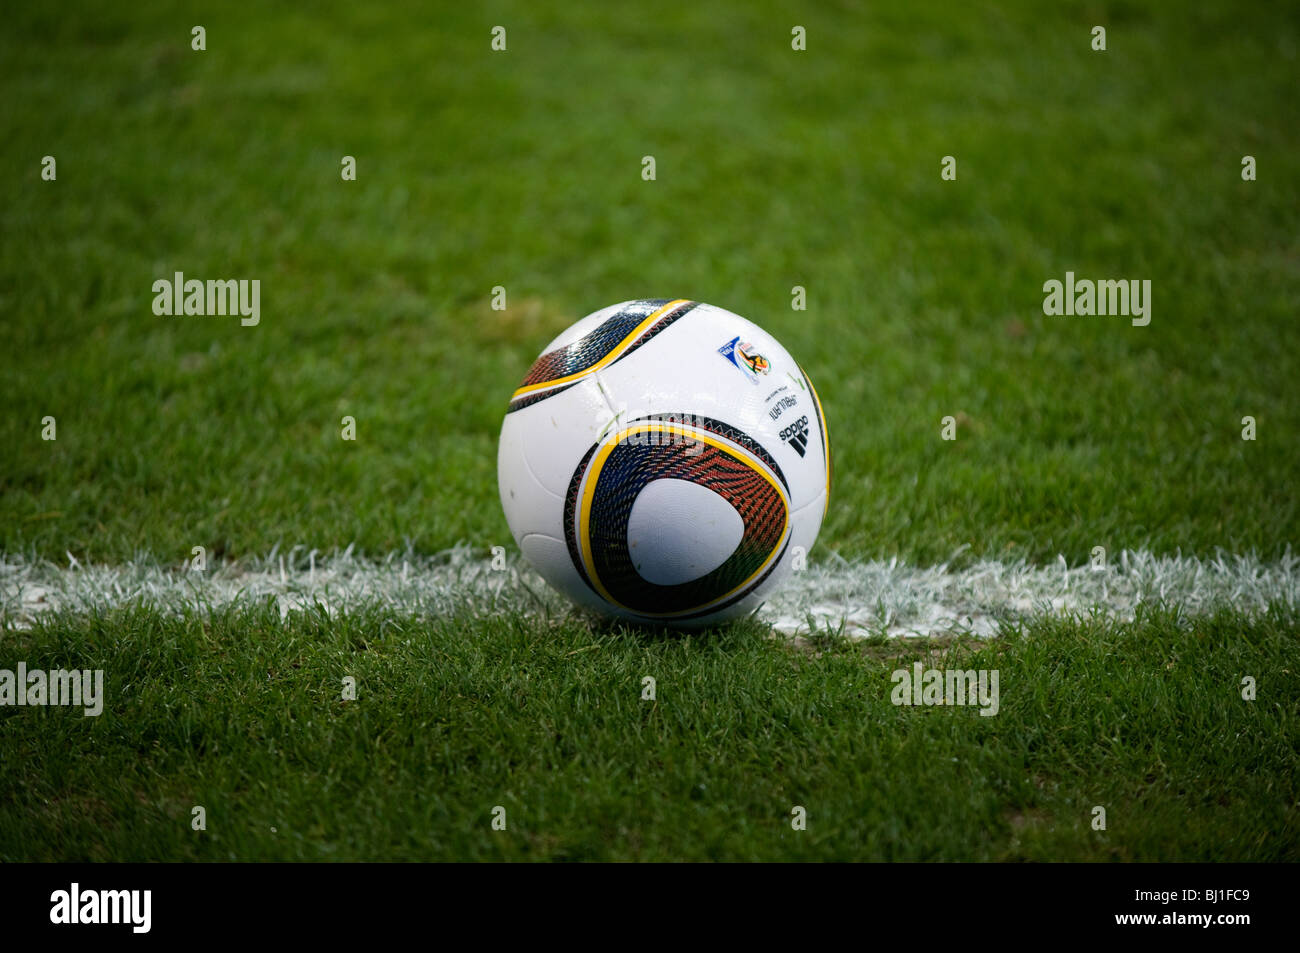 Official matchball of the FIFA World Cup 2010 in South Africa, Jabulani. Stock Photo